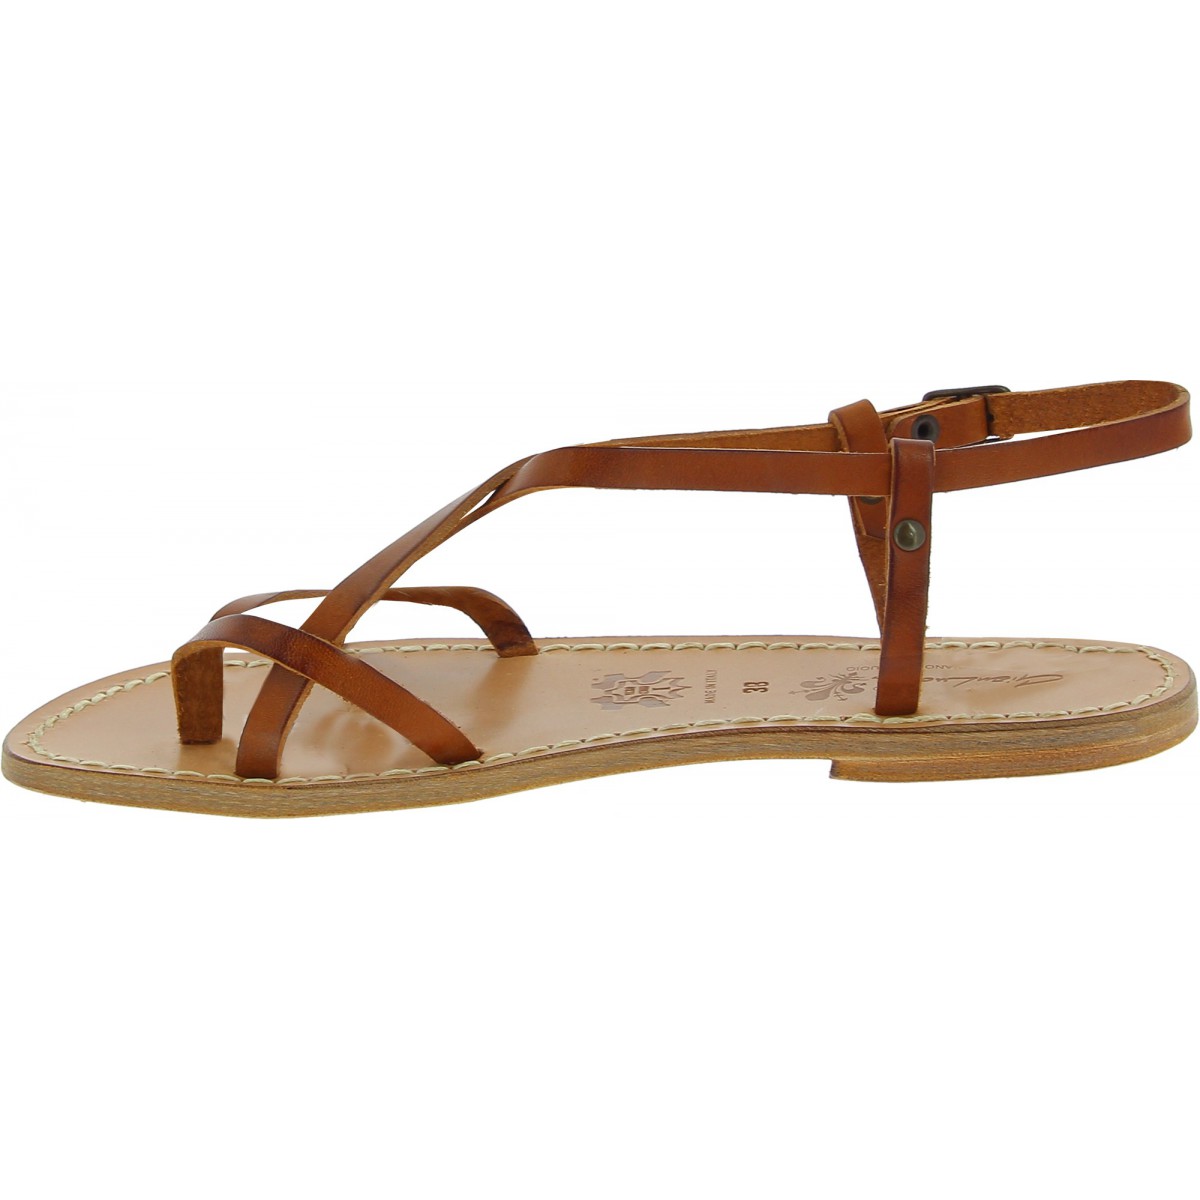 Tan leather sandals for women Handmade in Italy | The leather craftsmen